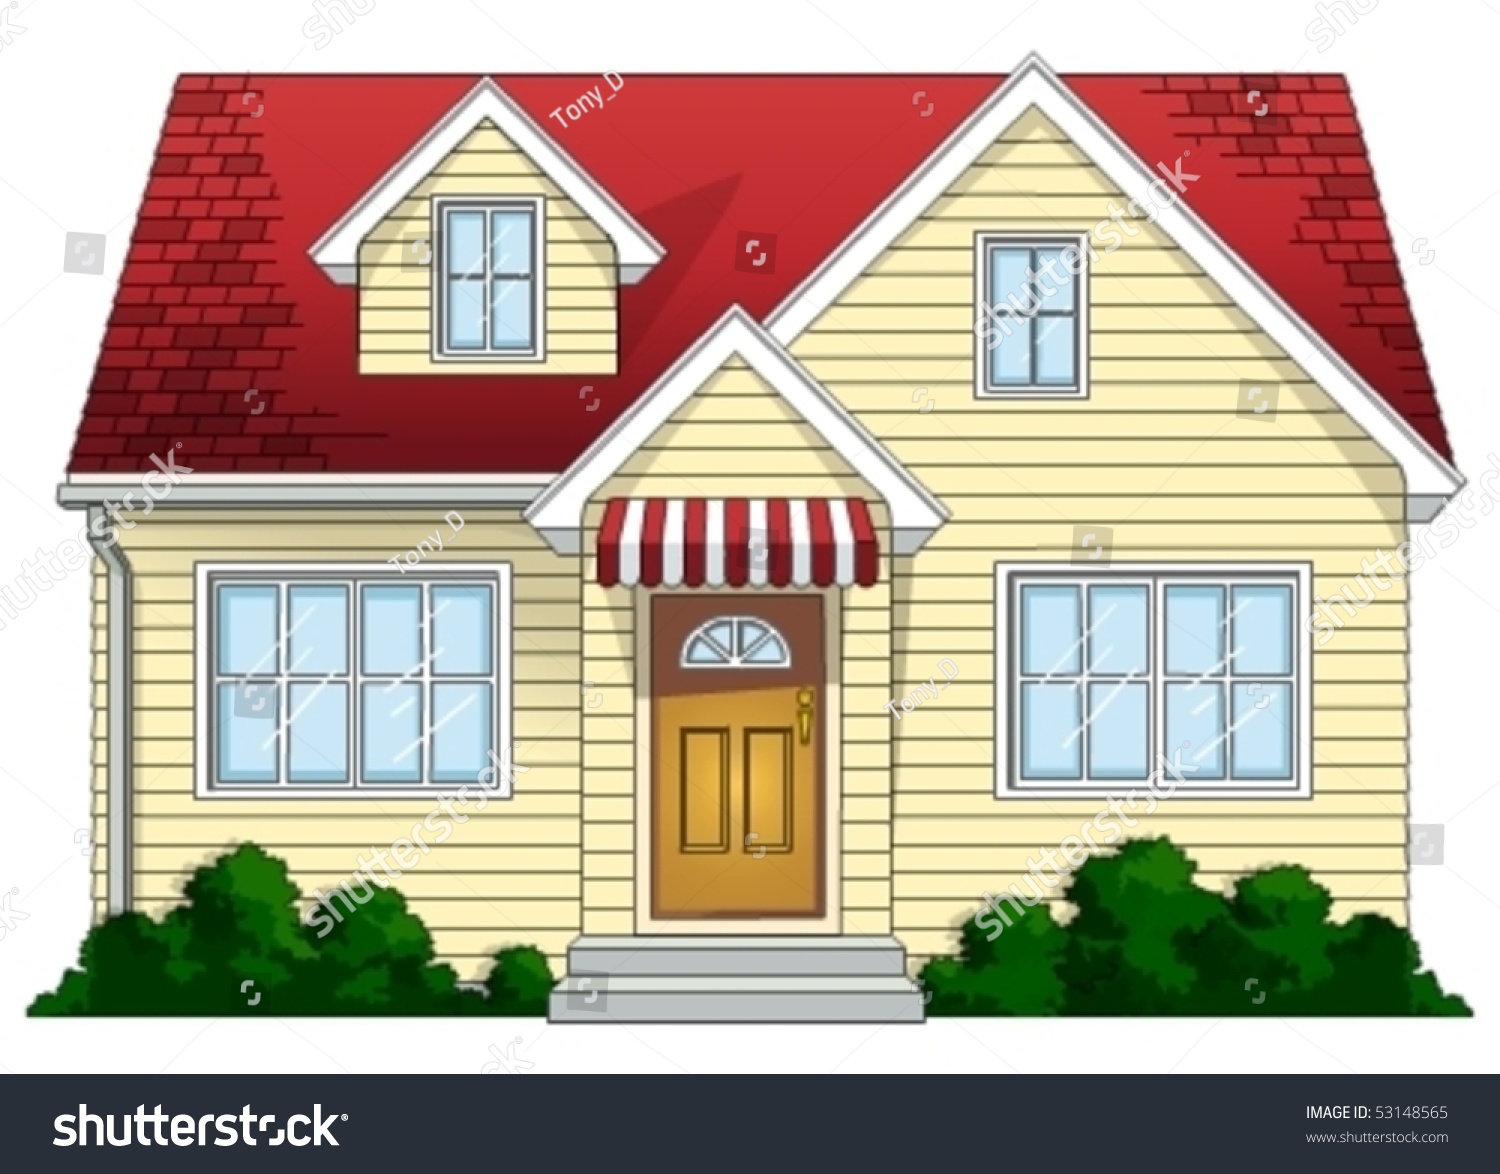 house with garage clipart - photo #42